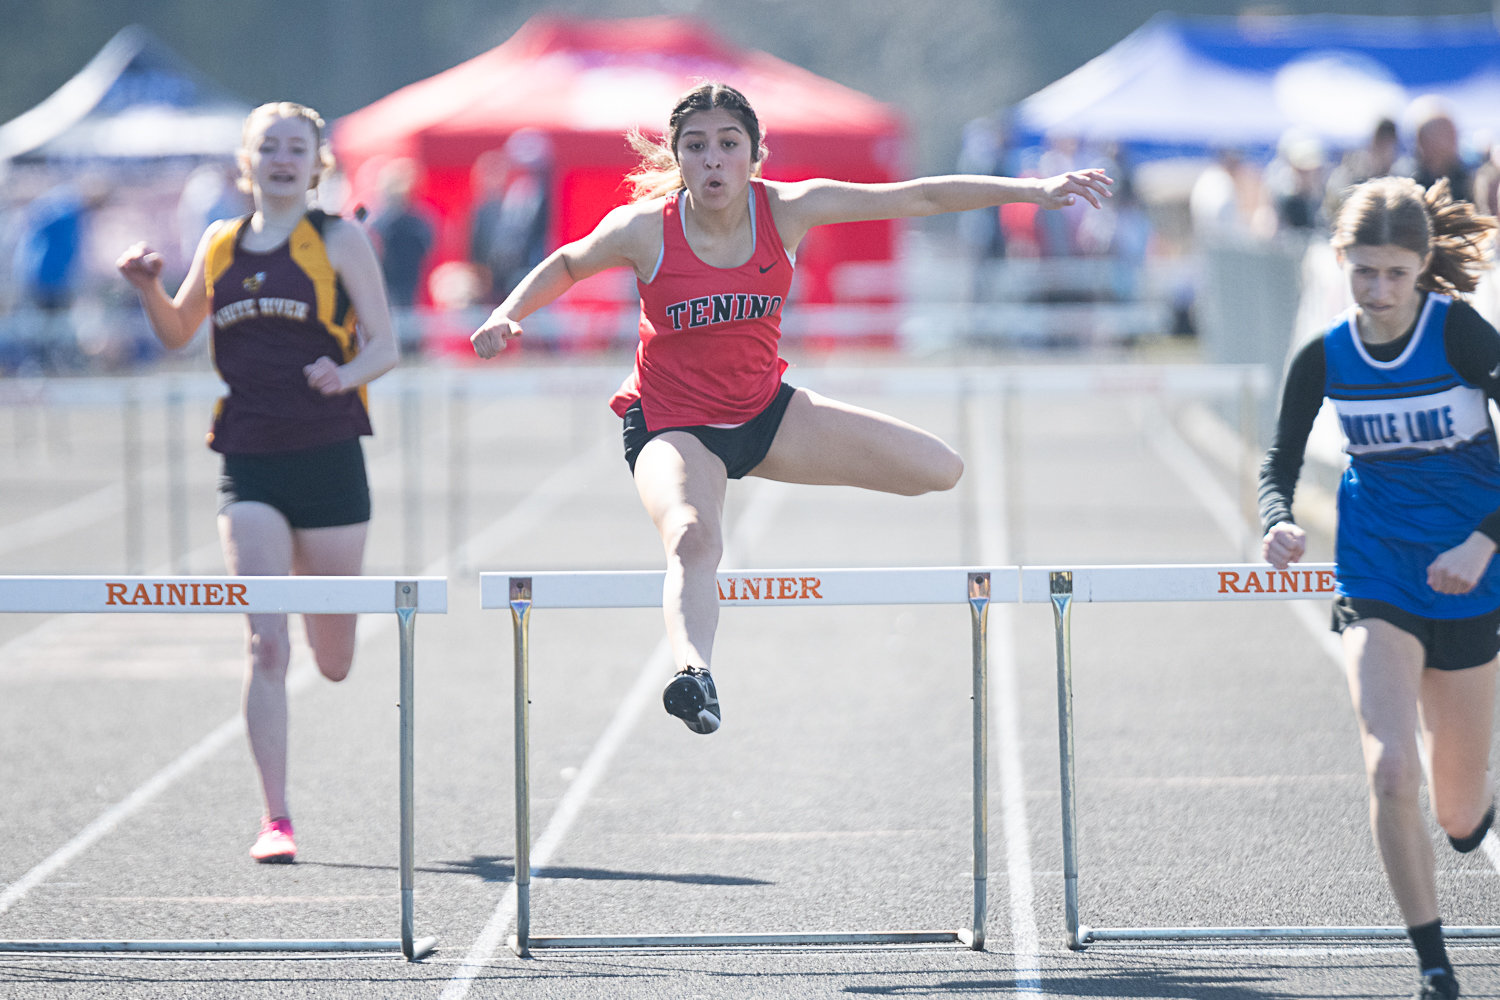 Tenino's Paisley Garcia clears a hurdle in the girls 300-meter hurdles at the Rainier Icebreaker on March 18.